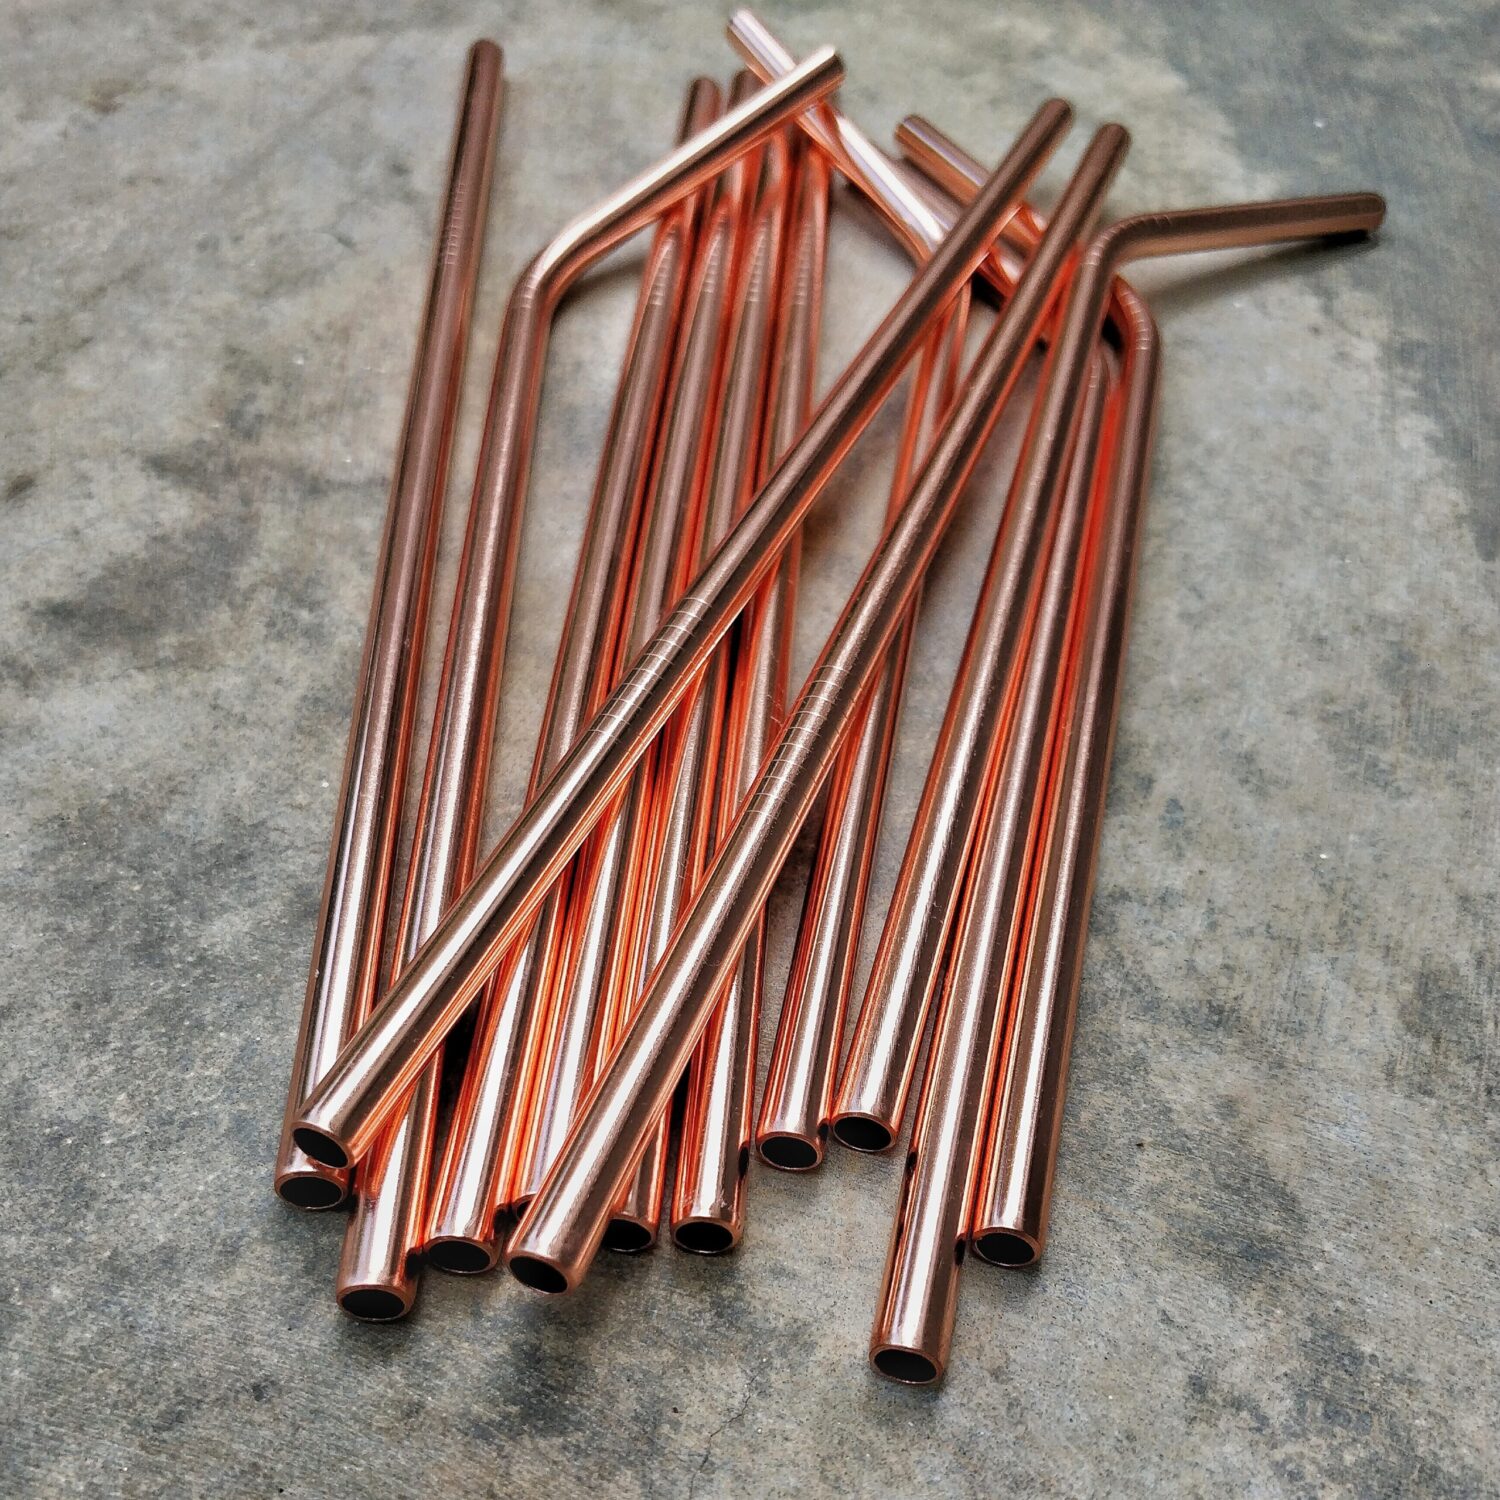 Copper Stainless Steel Straws Straight